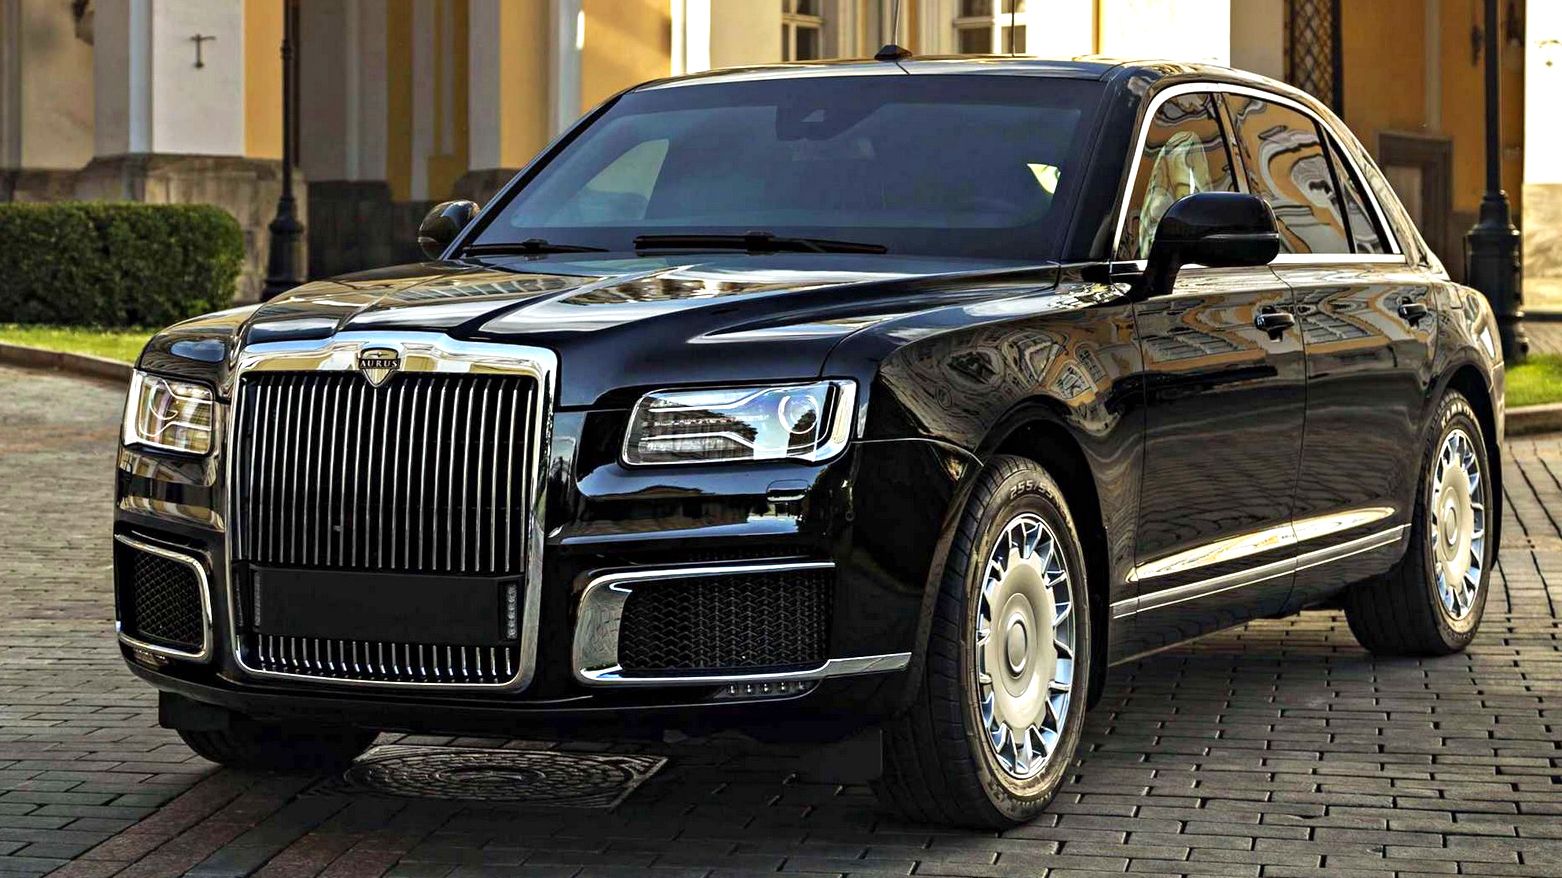 Aurus aims to be Russia's Rolls-Royce